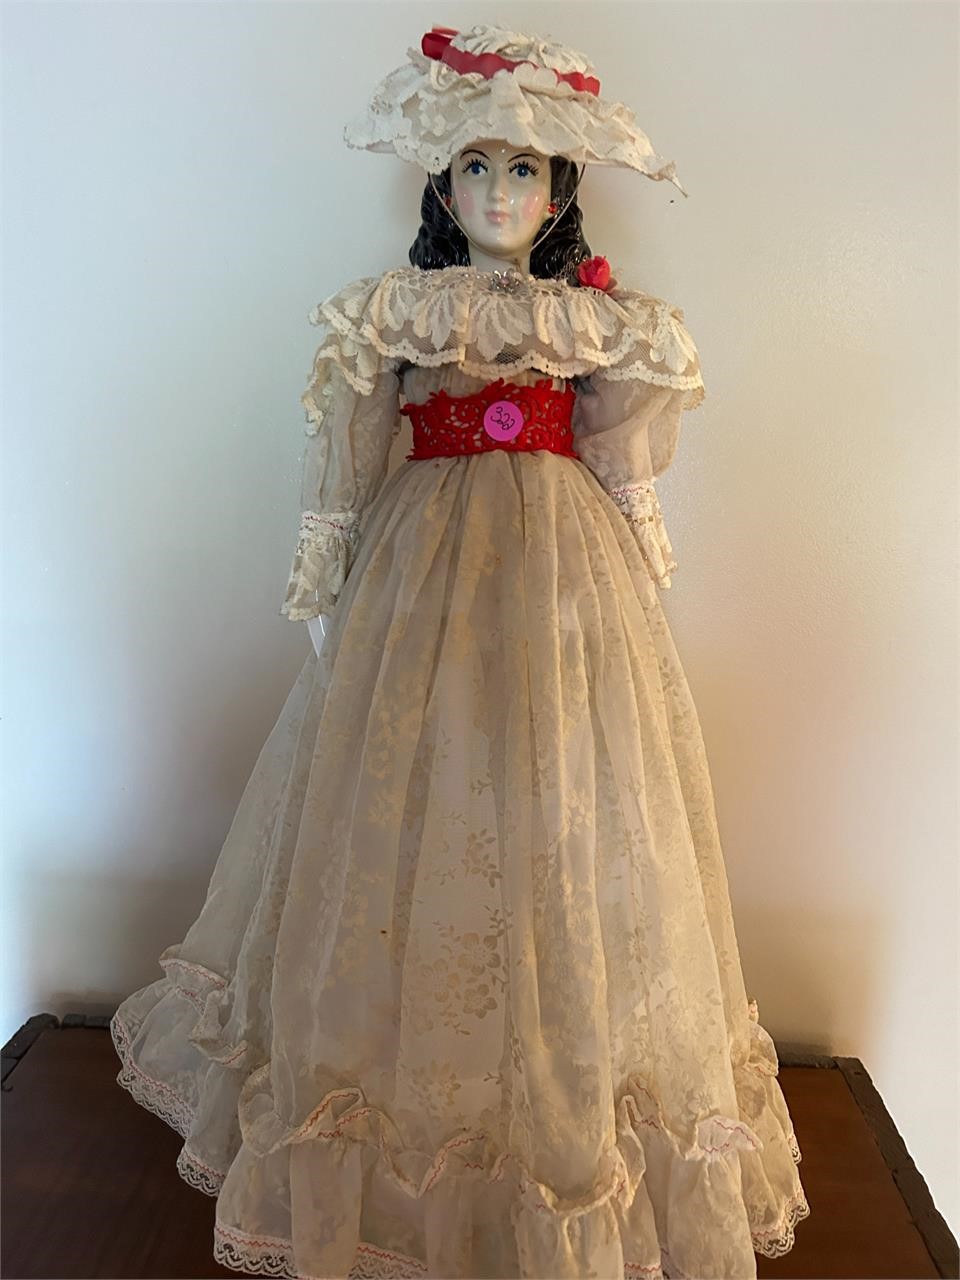 Gone With the Wind Porcelain/Cloth Doll - Scarlet